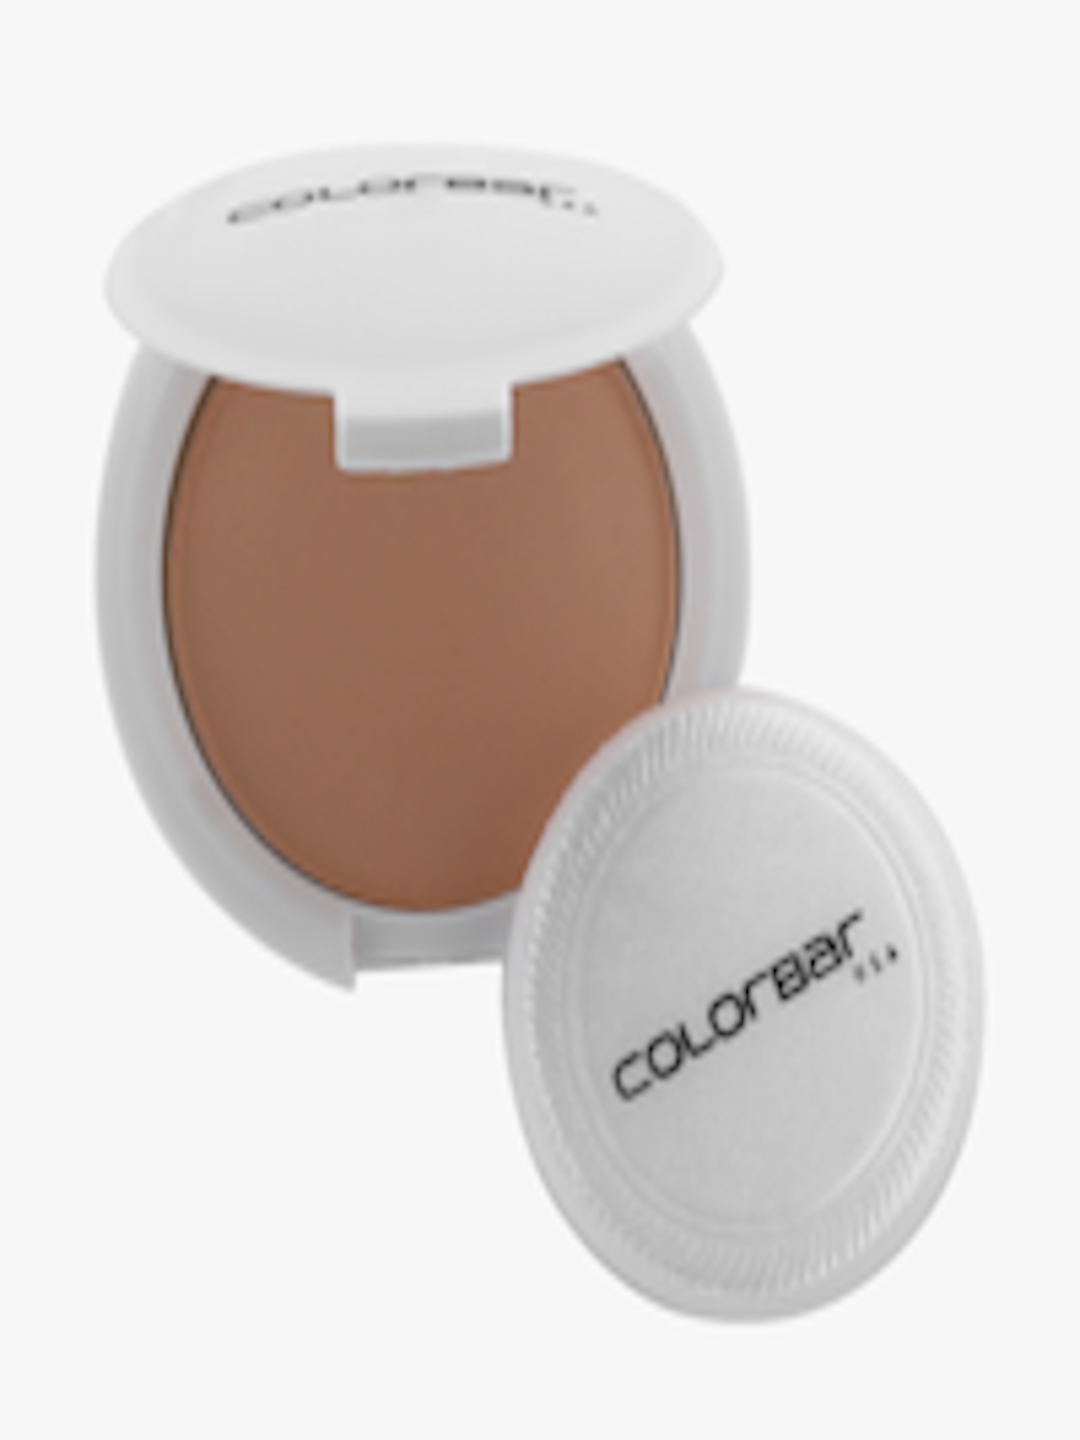 Buy ColorBar Radiant White UV Fairness Compact Powder 